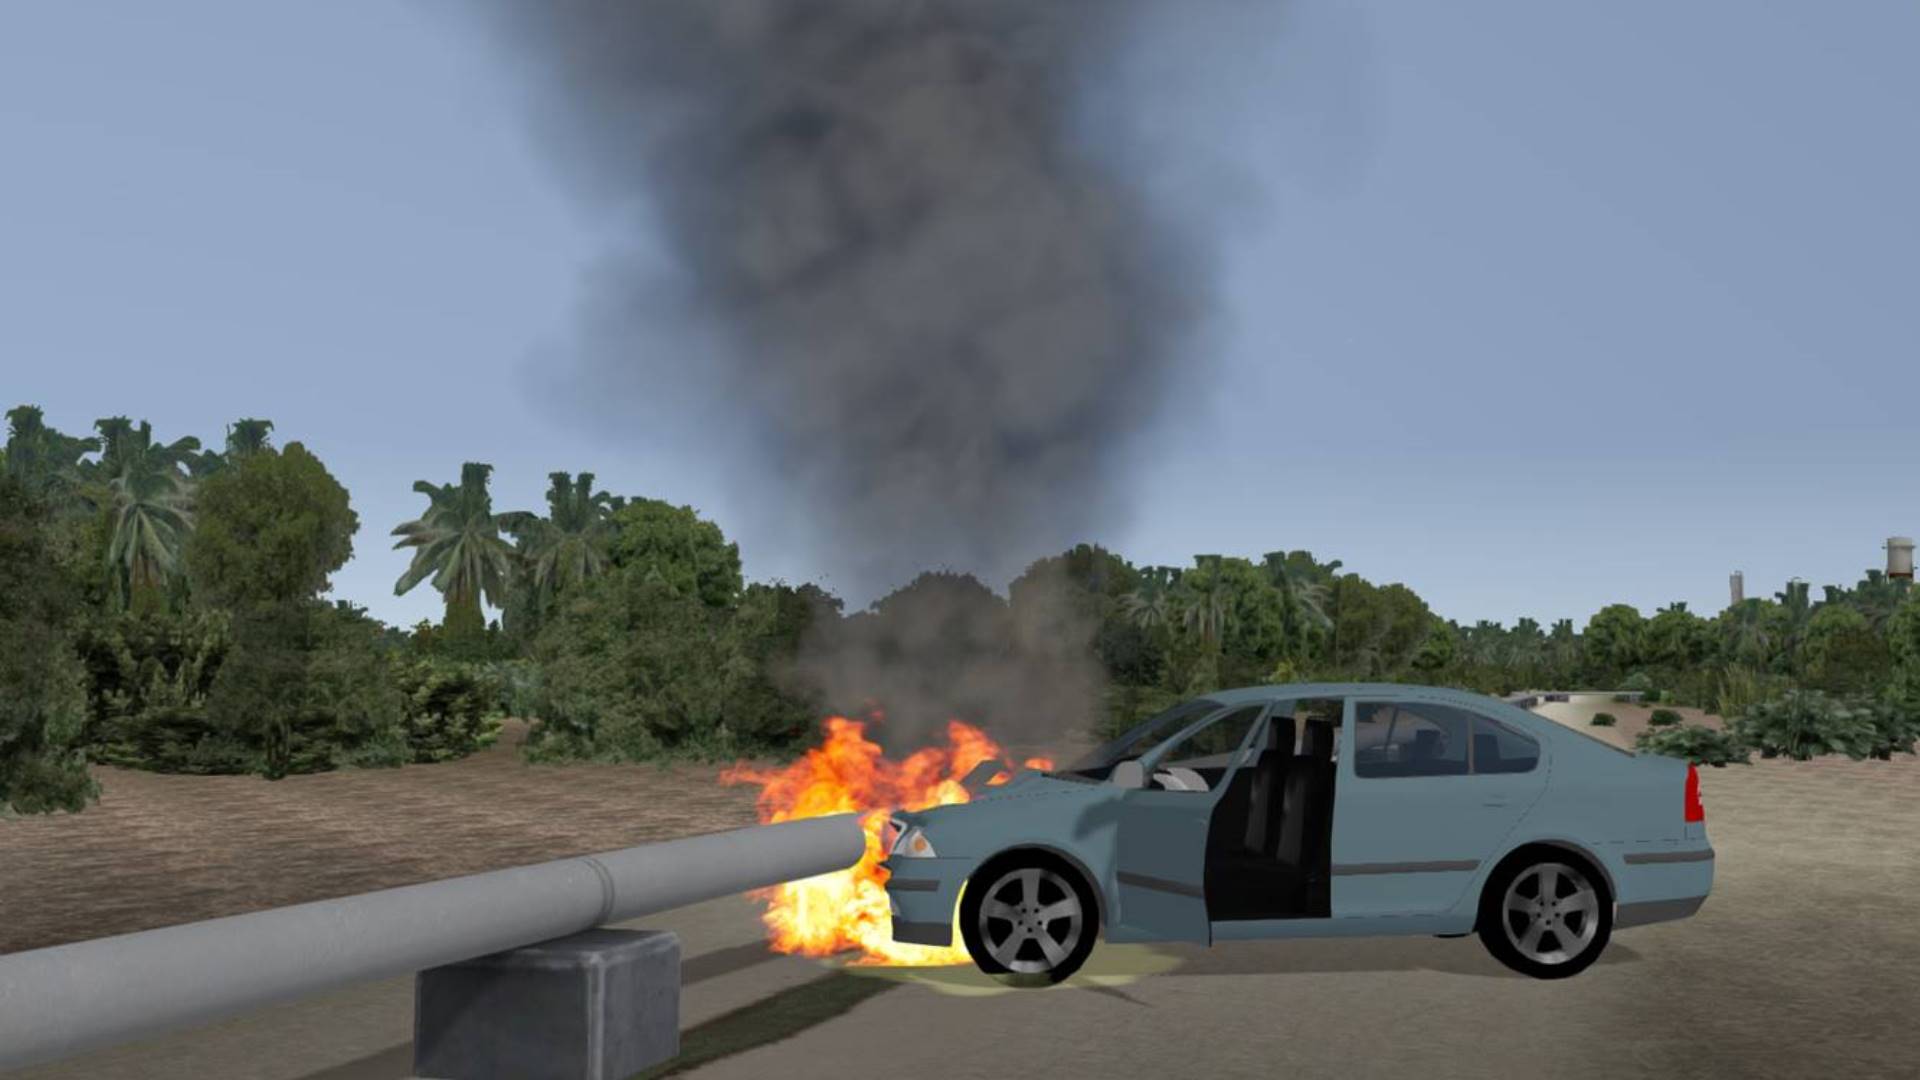 A large fuel pipeline fire and leak after a car crashed into it, scenario built by simulator staff.